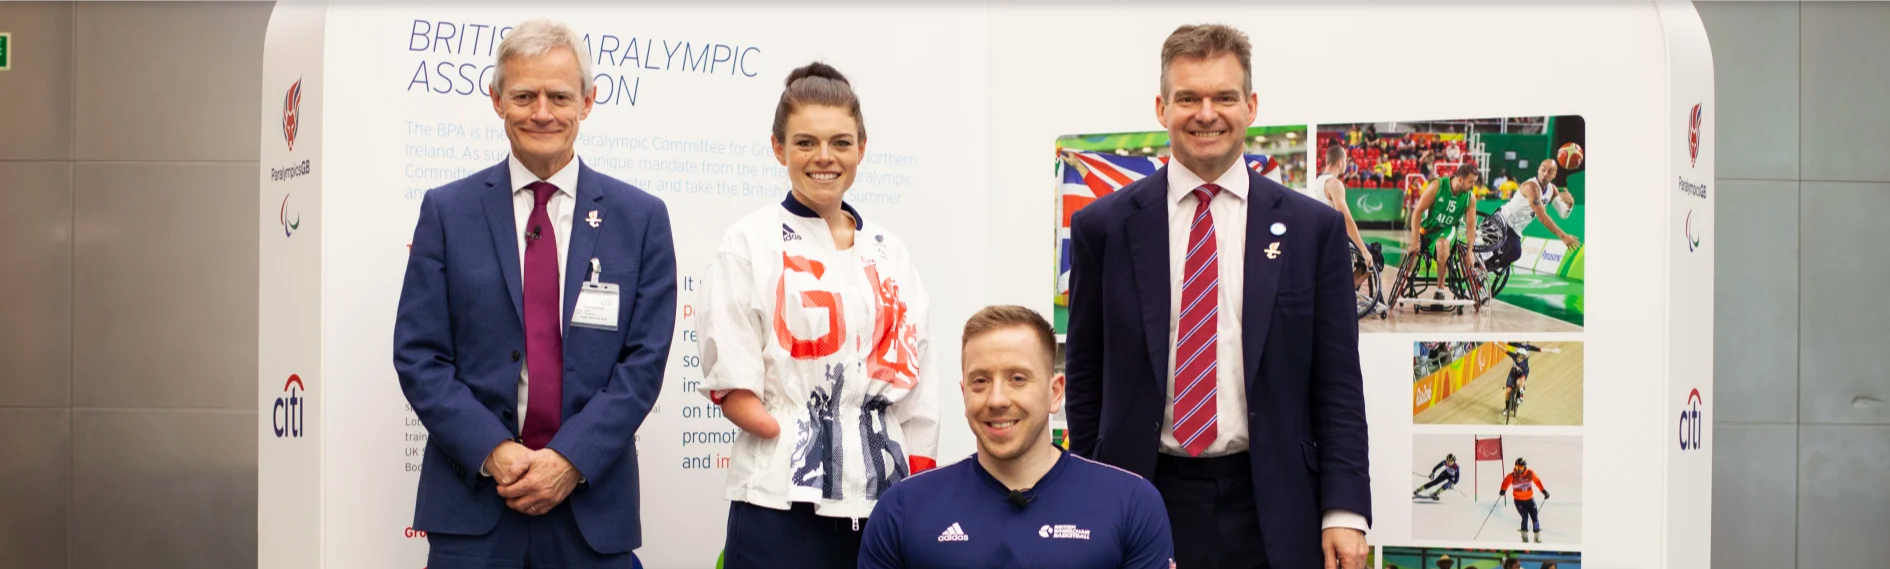 The British Paralympic Association has signed a new partnership with global bank Citi ©BPA